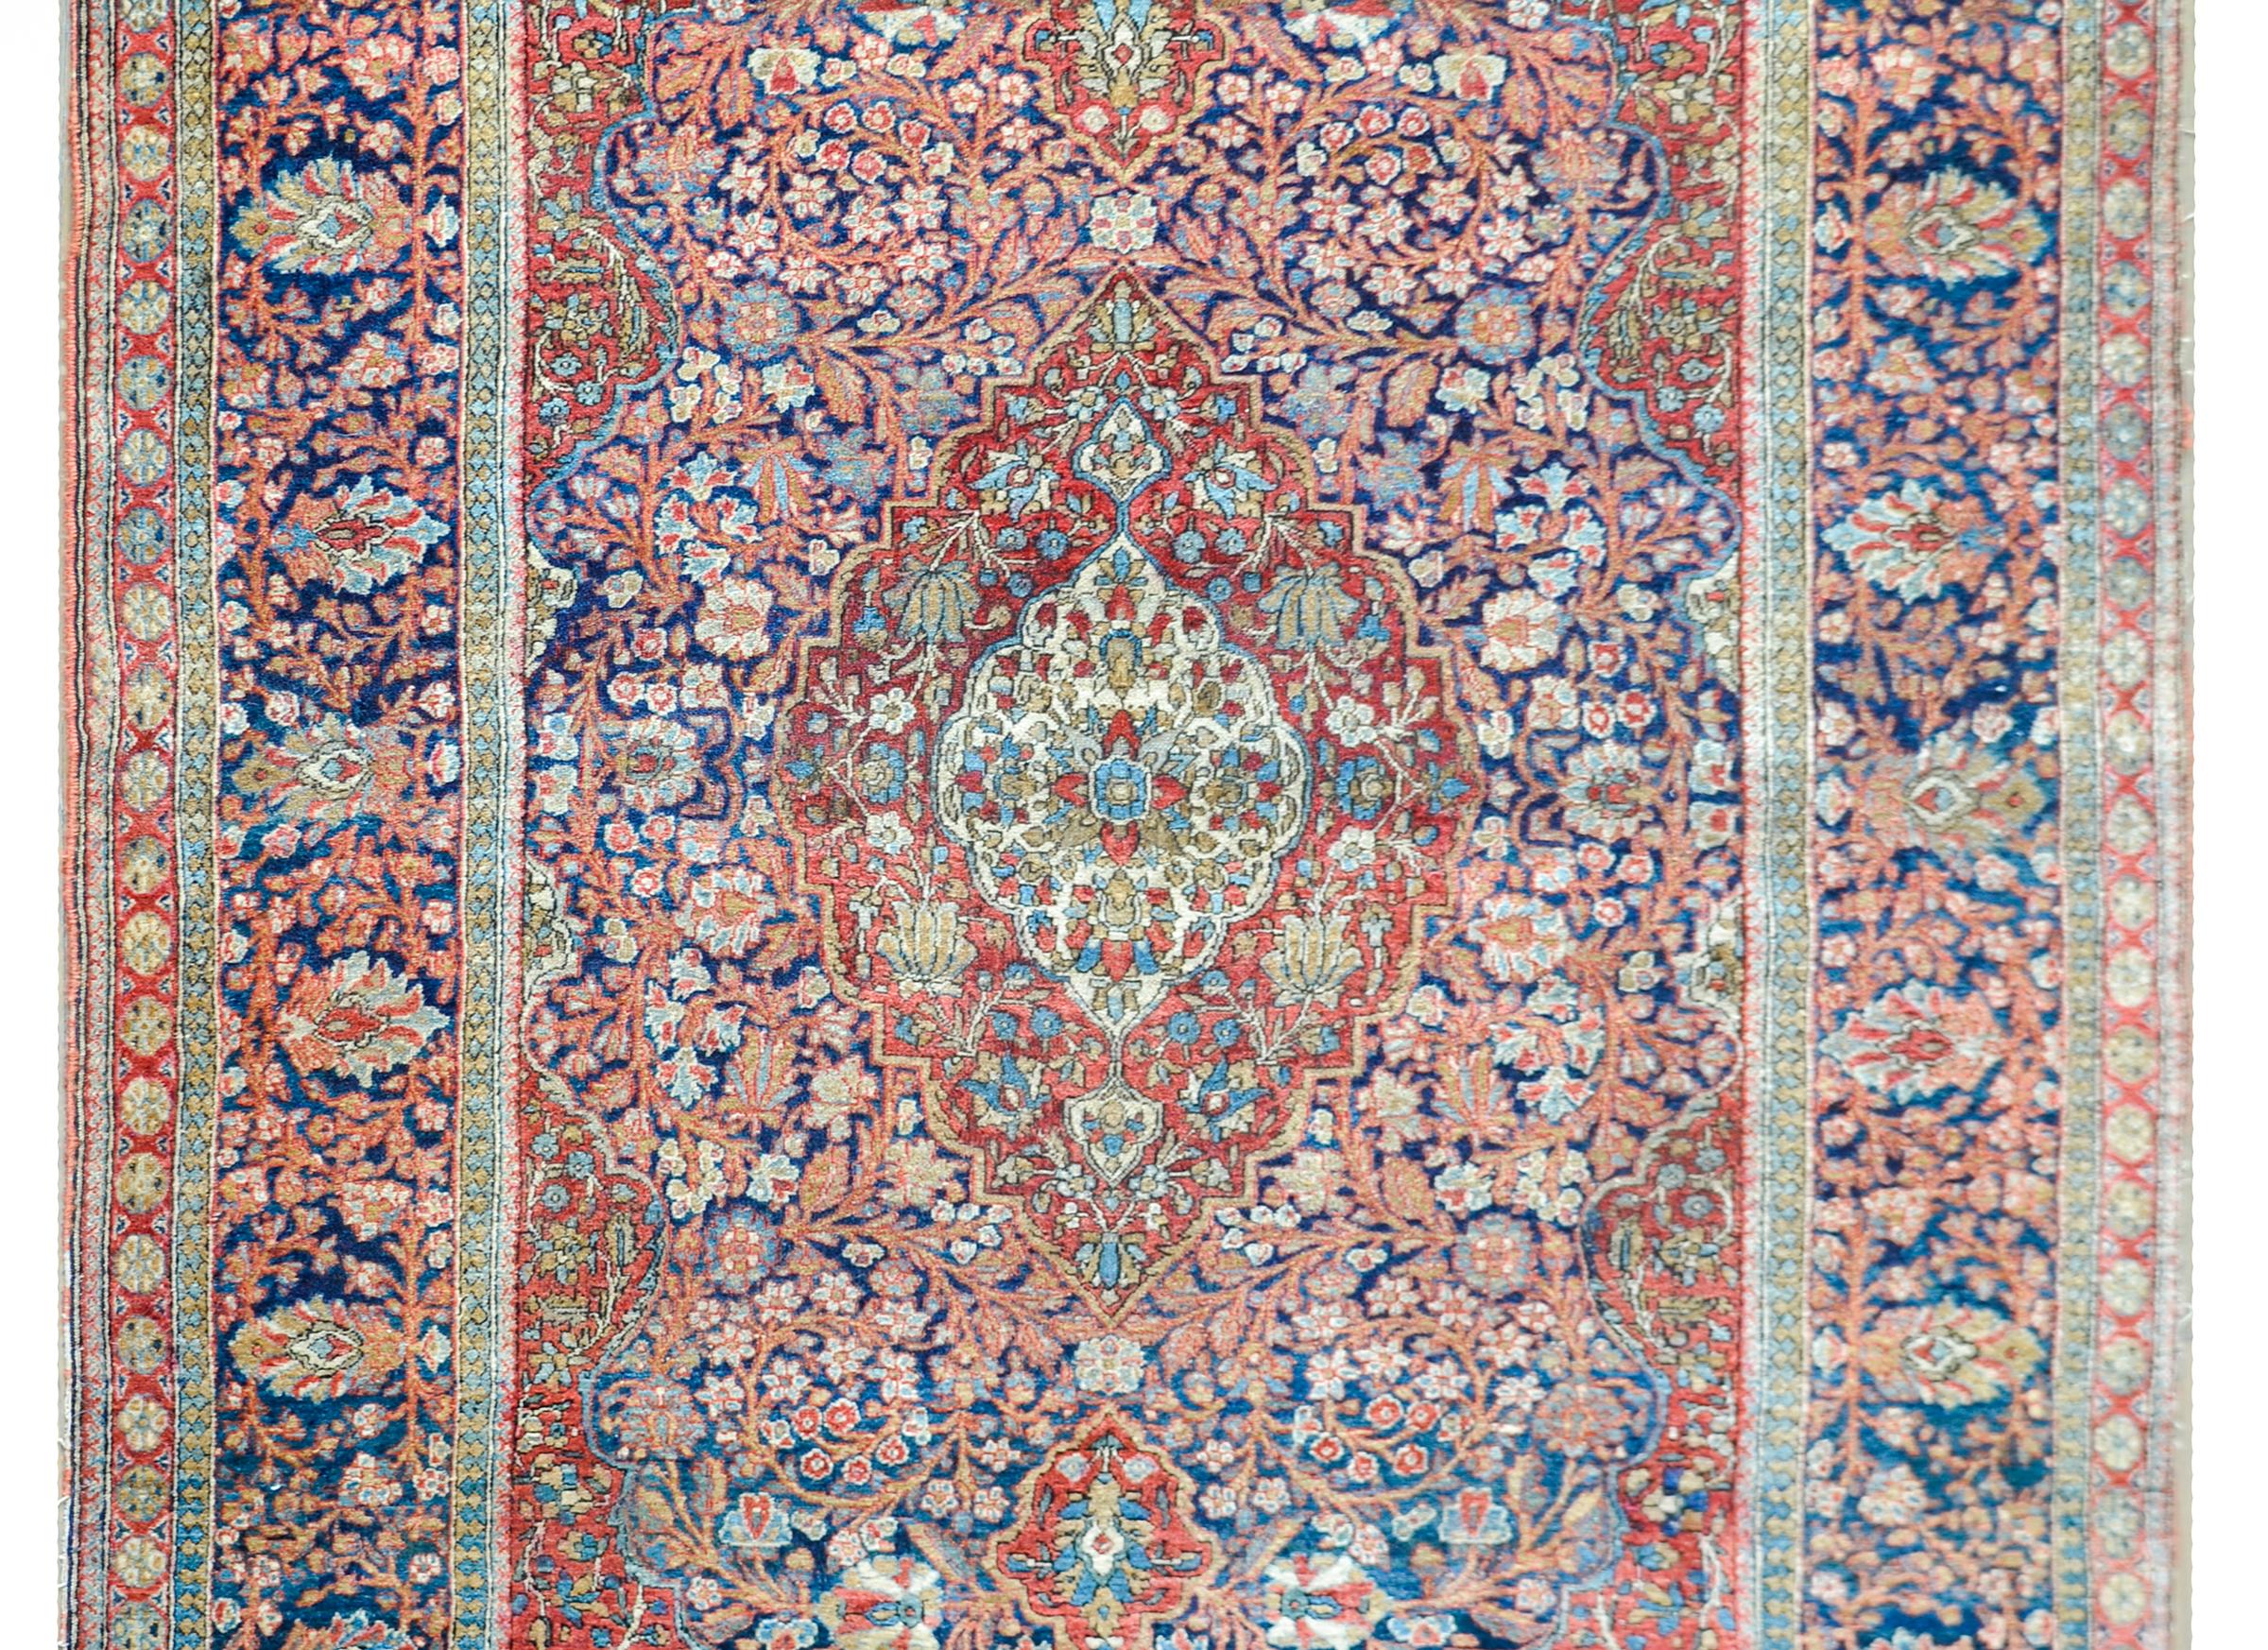 A fantastic early 20th century Persian Kashan rug with a mesmerizing pattern with a large central medallion filled with myriad flowers, and living among a field of more flowers and scrolling vines, and all woven in crimson, pink, gold, and cream